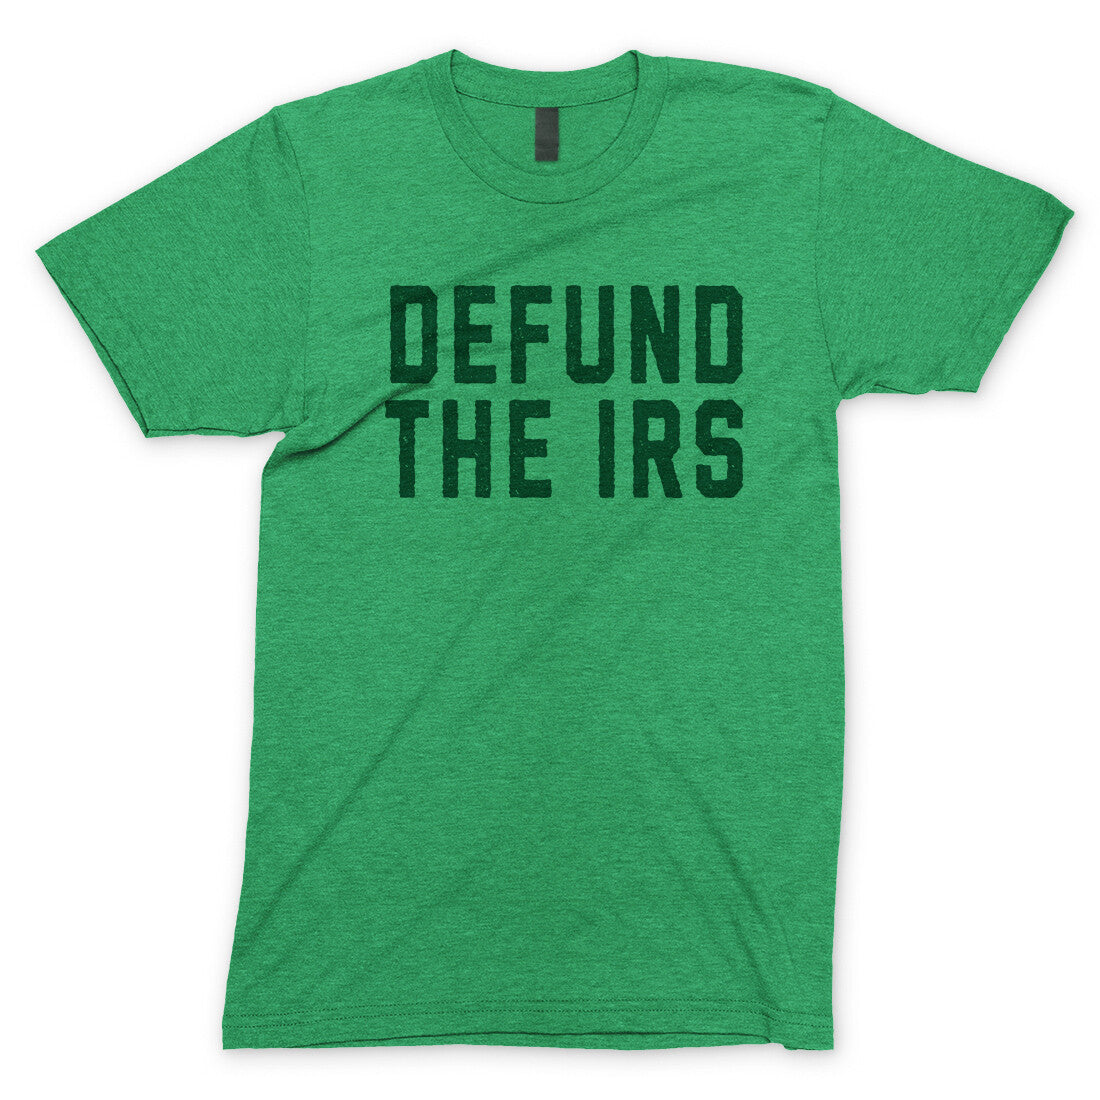 Defund the IRS in Heather Irish Green Color